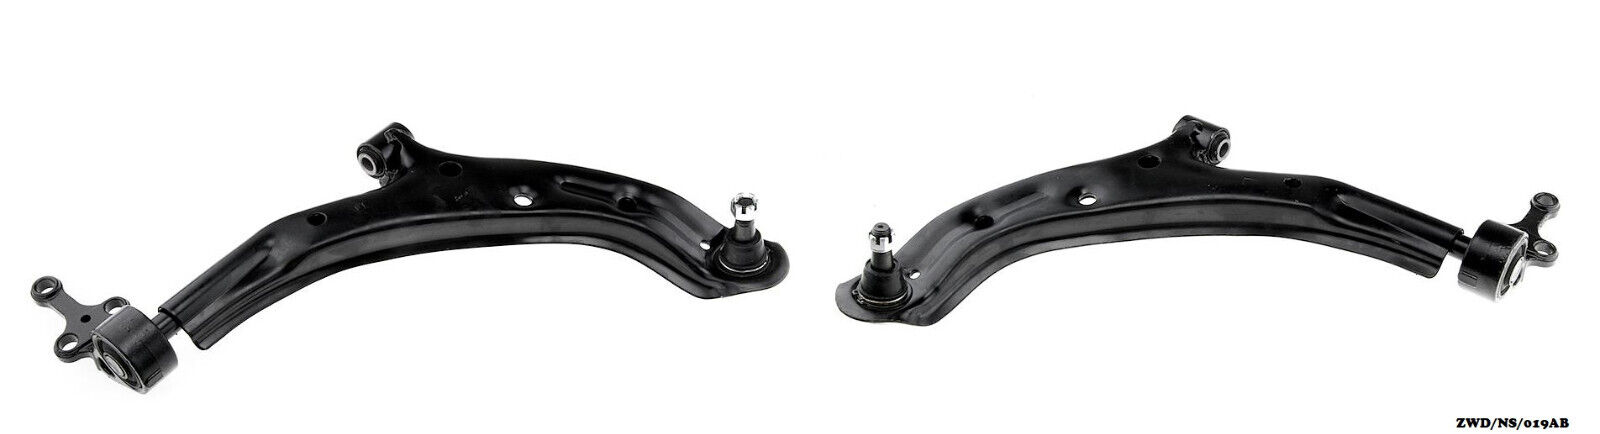 2 x Front Lower Control Arm For NISSAN ALMERA MK2 2000-2006 ZWD/NS/019AB